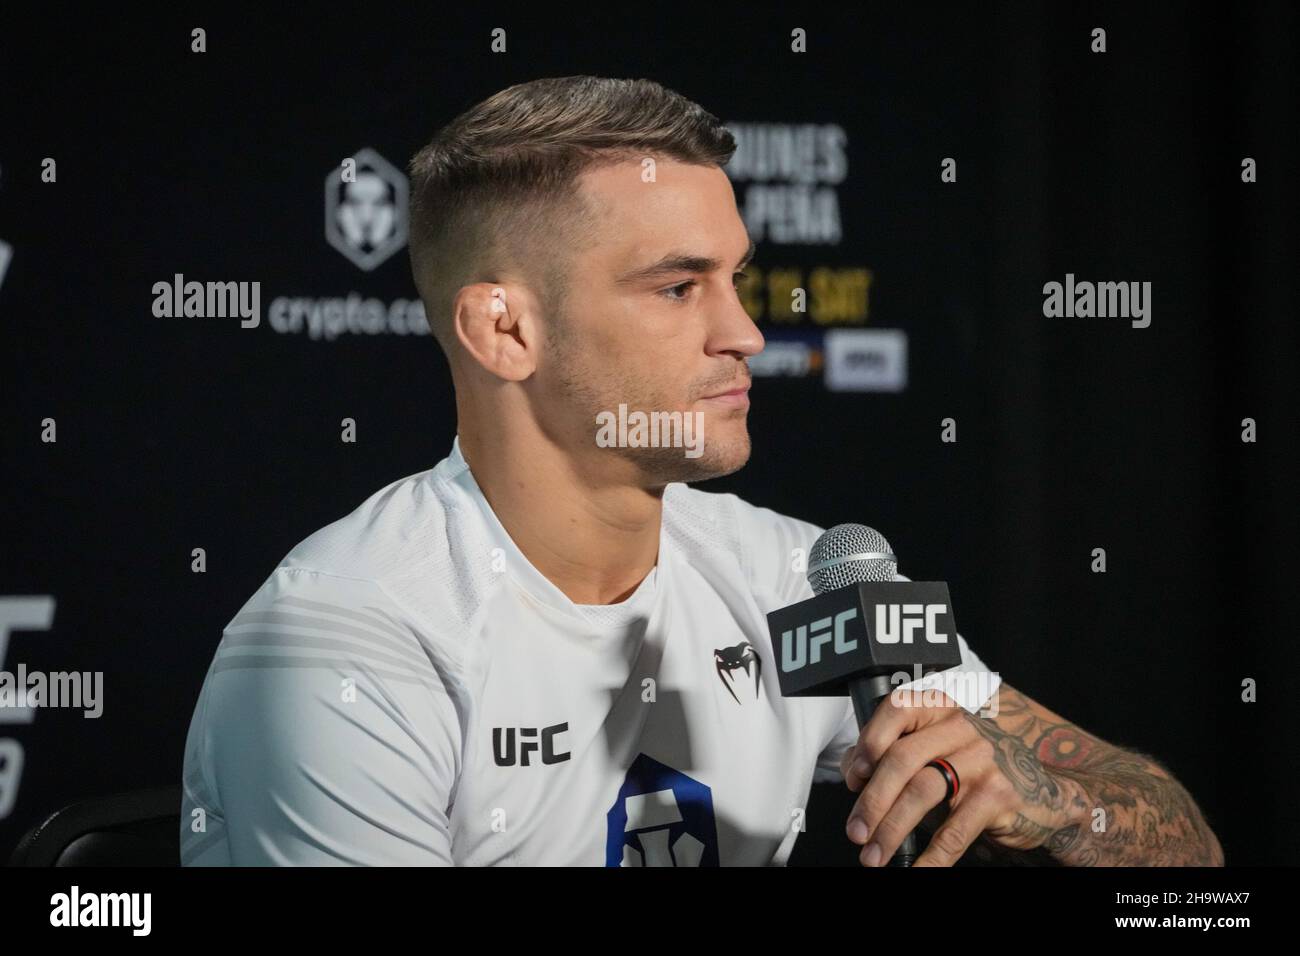 https://c8.alamy.com/comp/2H9WAX7/las-vegas-nv-december-8-dustin-poirier-meets-with-the-press-during-media-day-for-the-upcoming-ppv-match-at-ufc-apex-for-ufc269-oliveira-vs-poirier-media-day-on-december-8-2021-in-las-vegas-nv-united-states-photo-by-louis-grassepximages-credit-px-imagesalamy-live-news-2H9WAX7.jpg